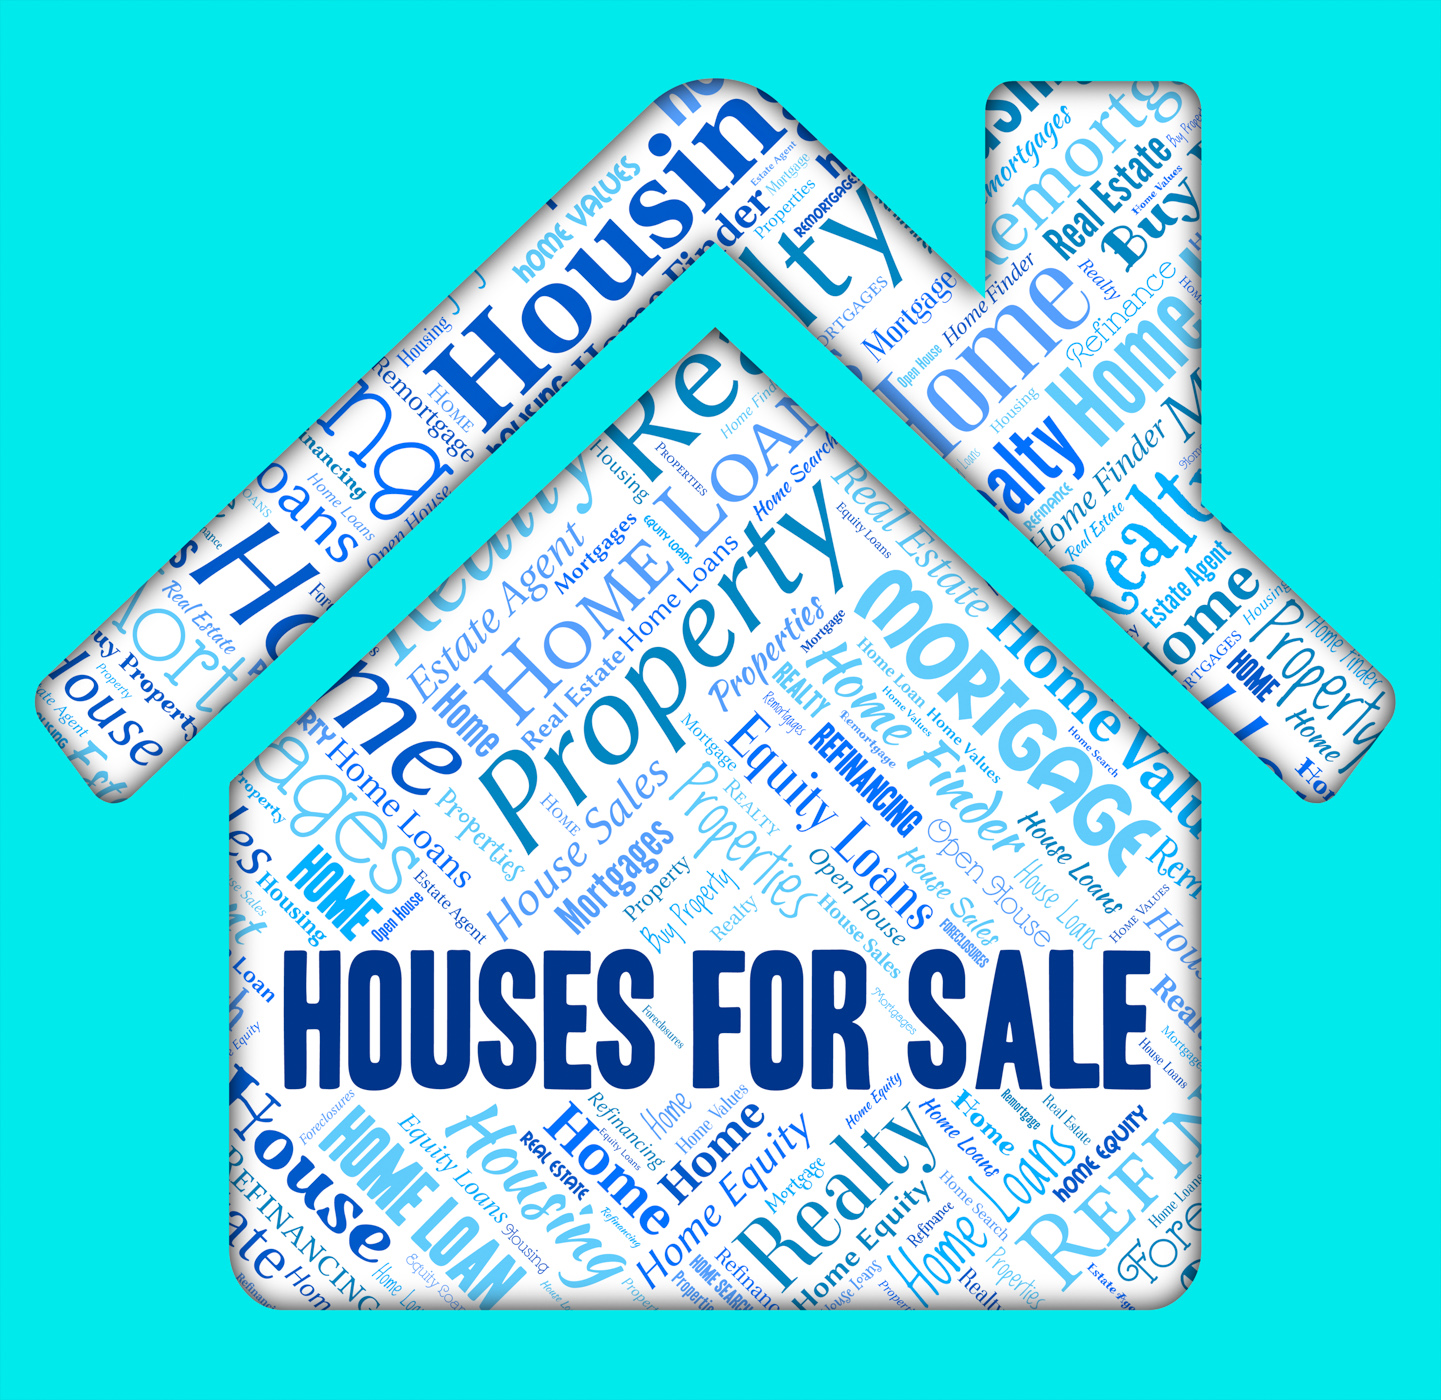 Houses for sale means residential homes and property photo